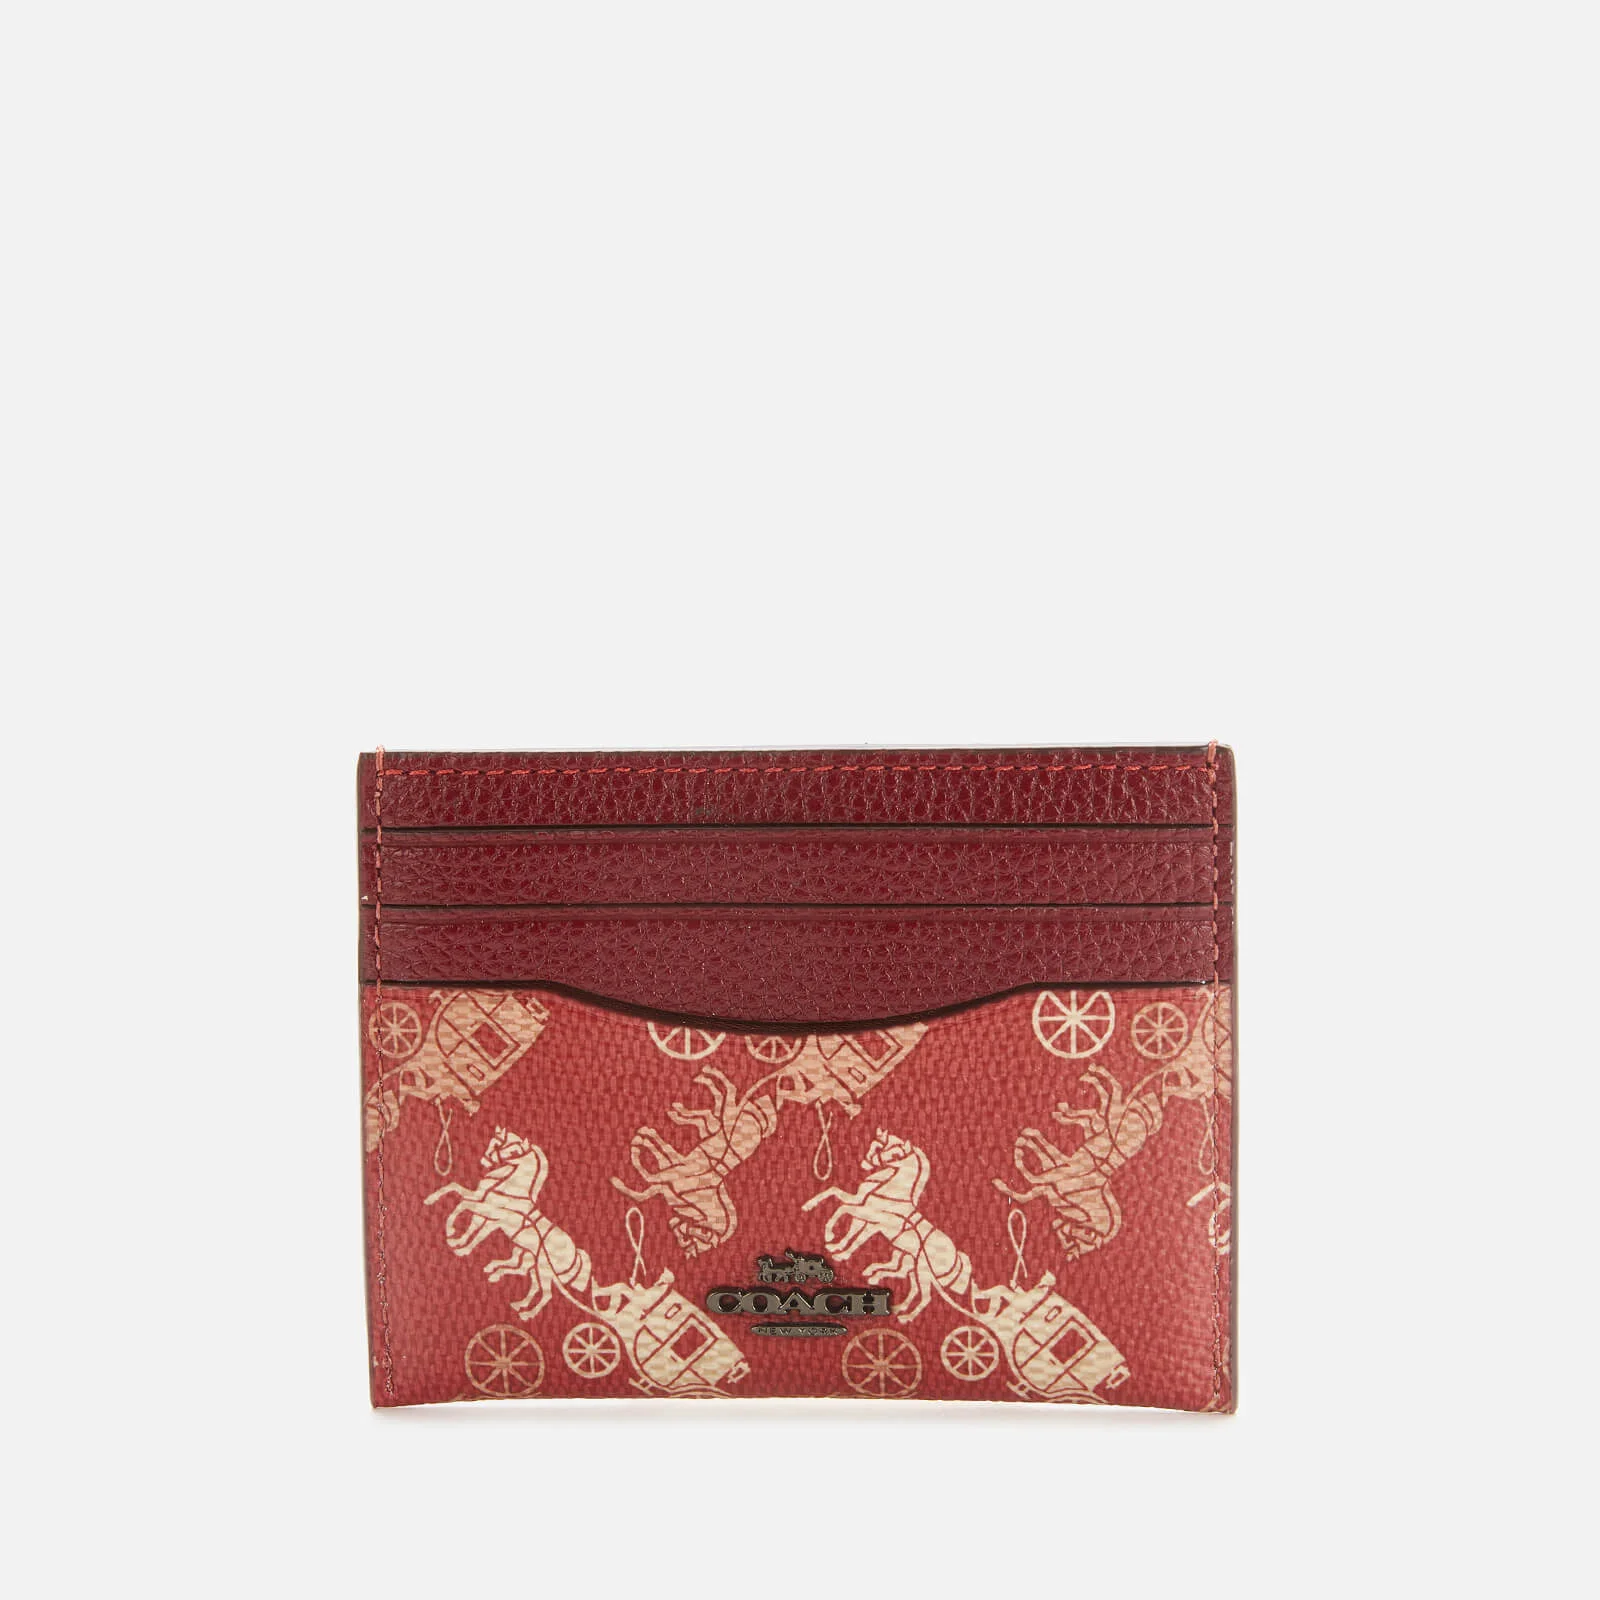 Coach 1941 Women's Coated Canvas Flat Card Case - Red Image 1